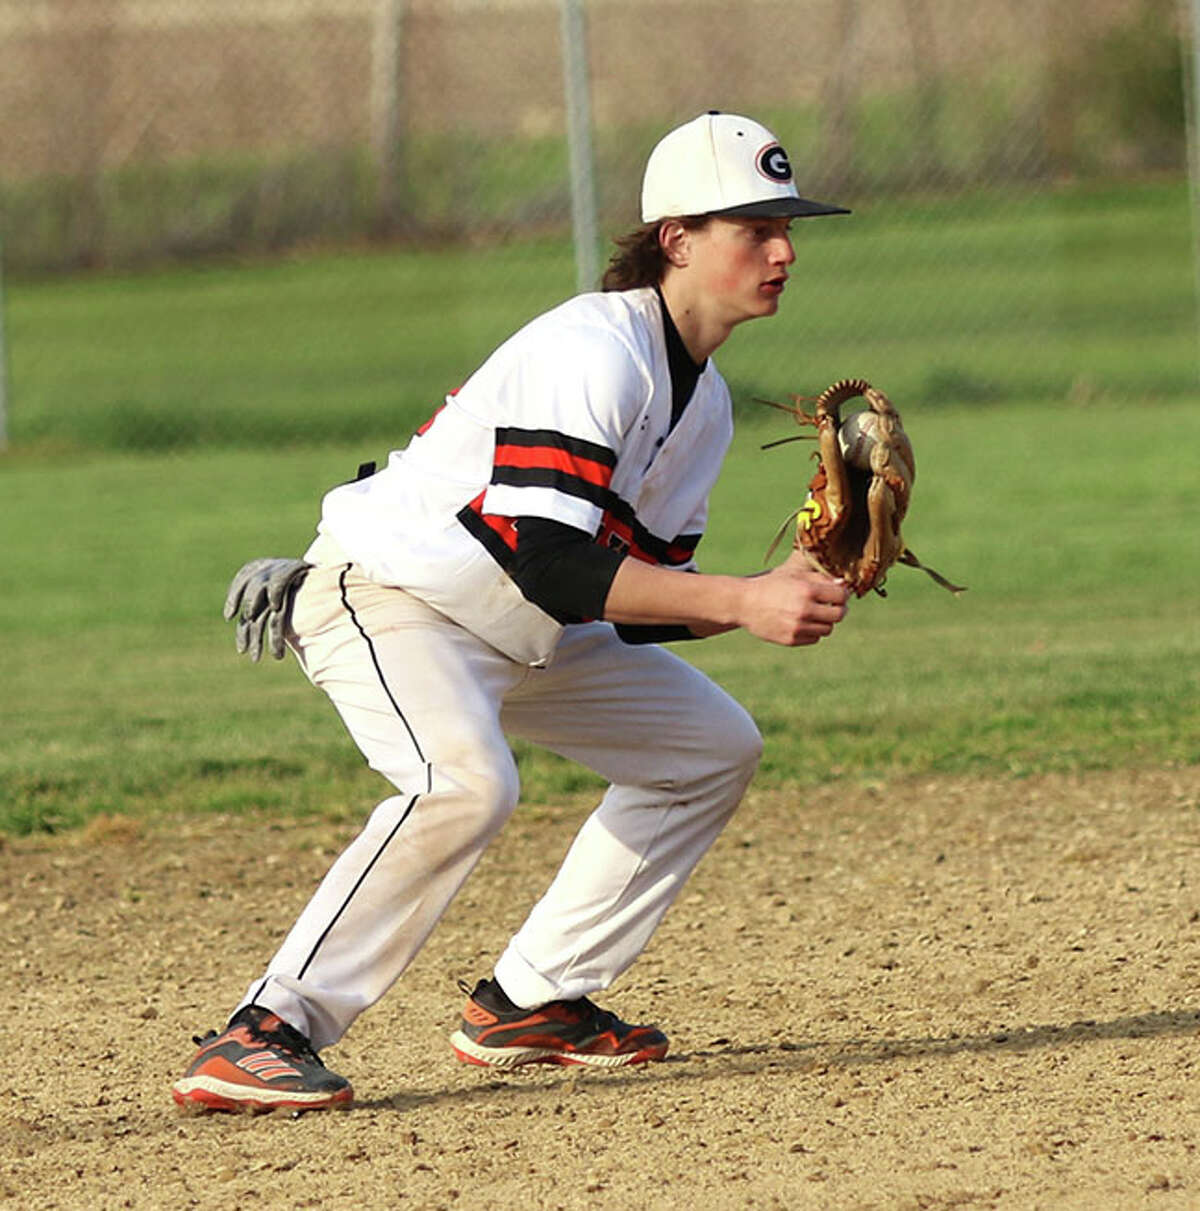 Gillespie shortstop Tristen Wargo gloves a groundball before throwing out a runner in a game against Southwestern earlier this season in Brighton.